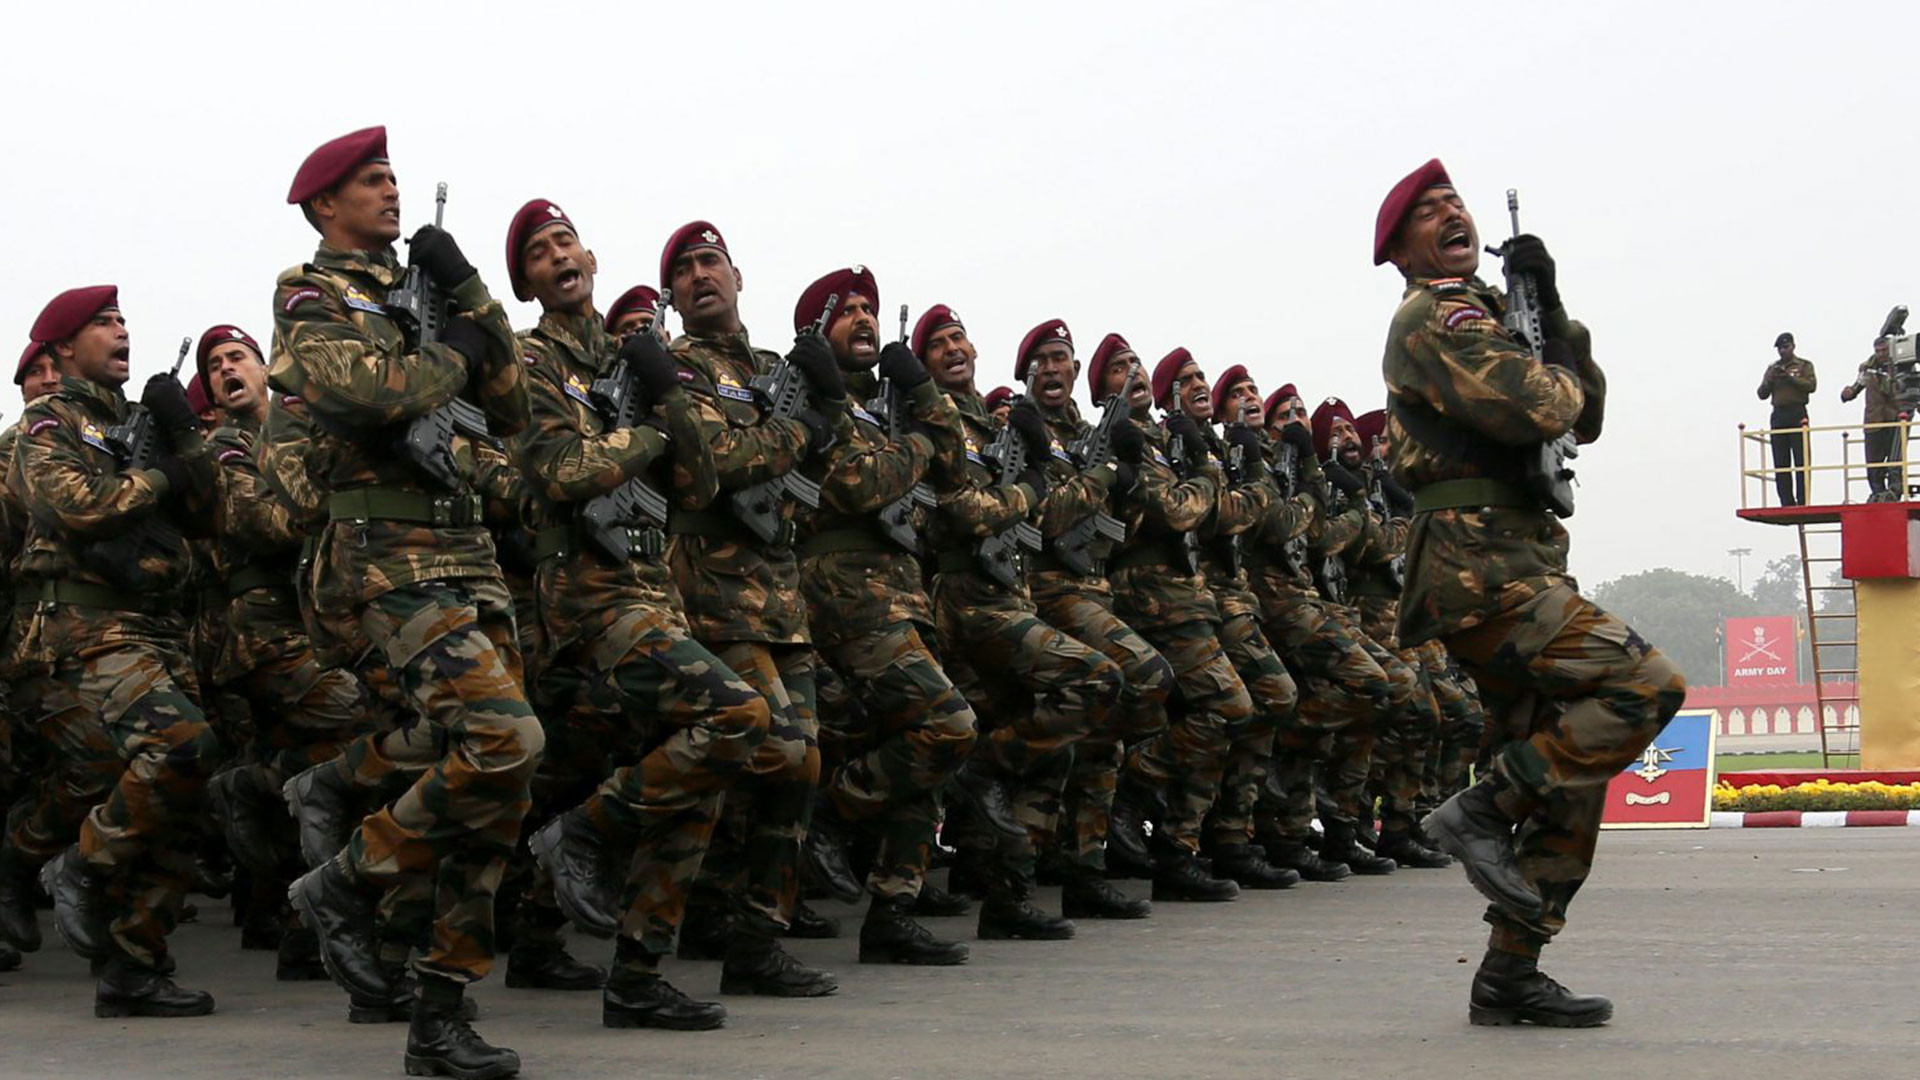 Indian army day 2022 images